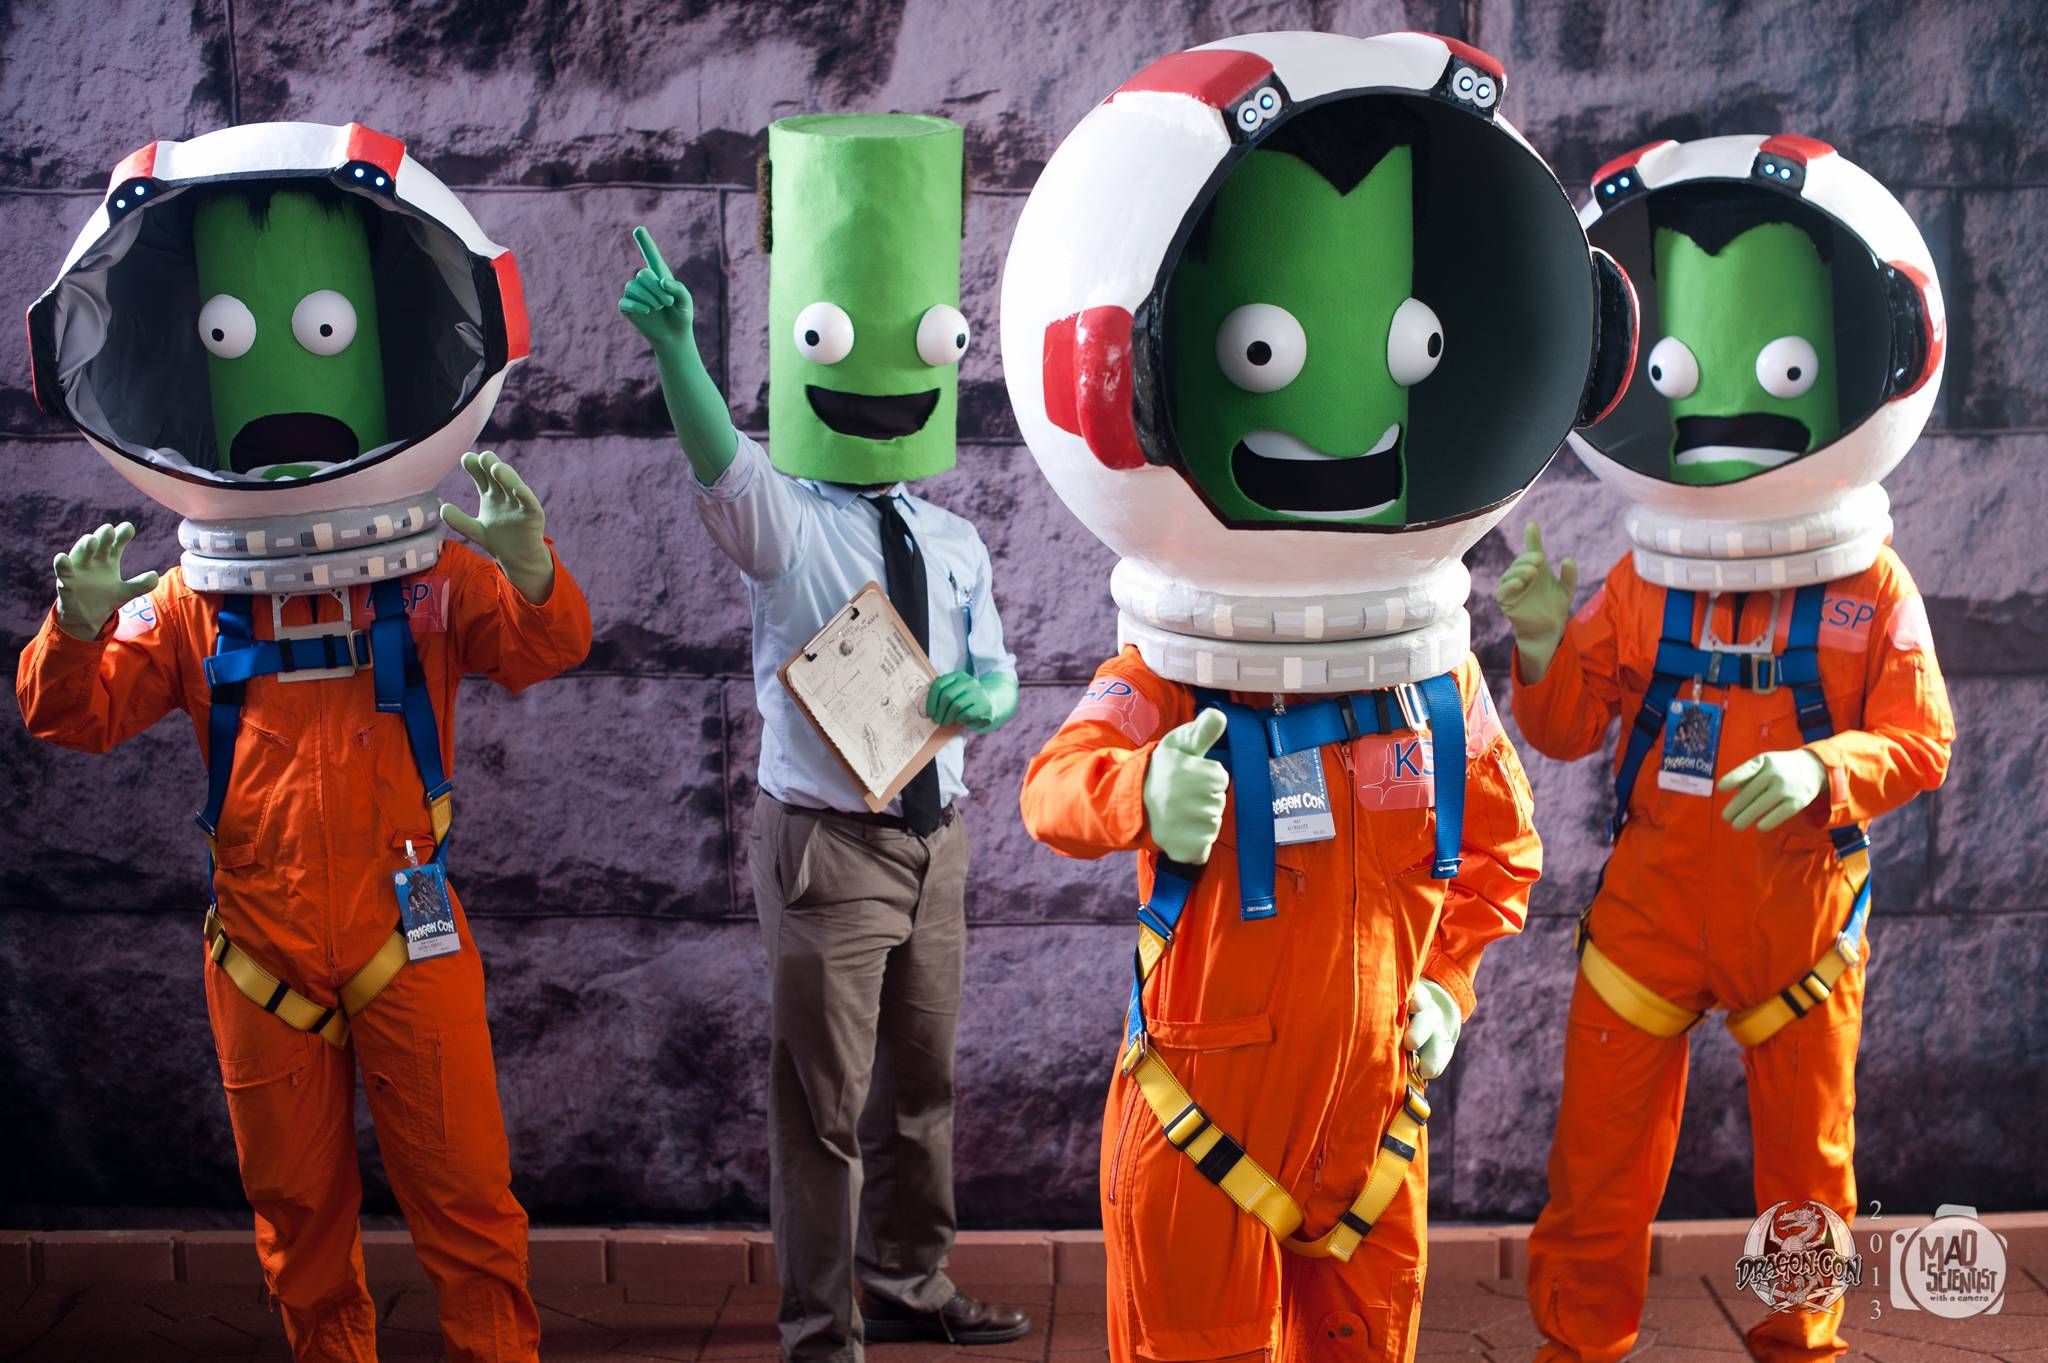 My First Kerbal Space Program Prop and Costume | RPF Costume and Prop Maker  Community